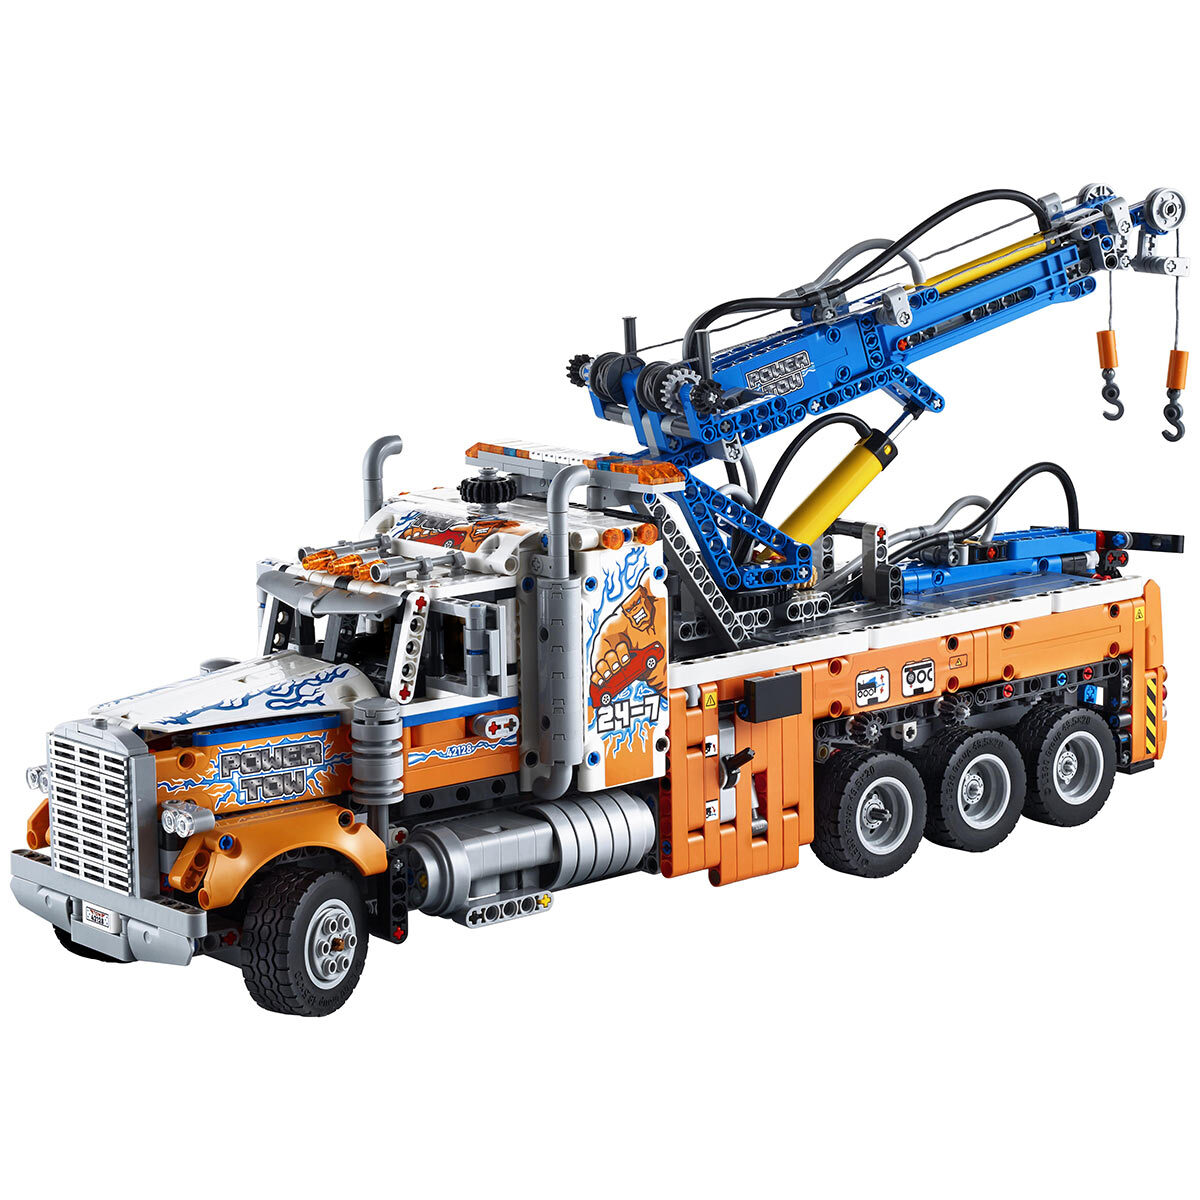 Buy LEGO Technic Heavy Duty Tow-Truck Overview Image at Costco.co.uk